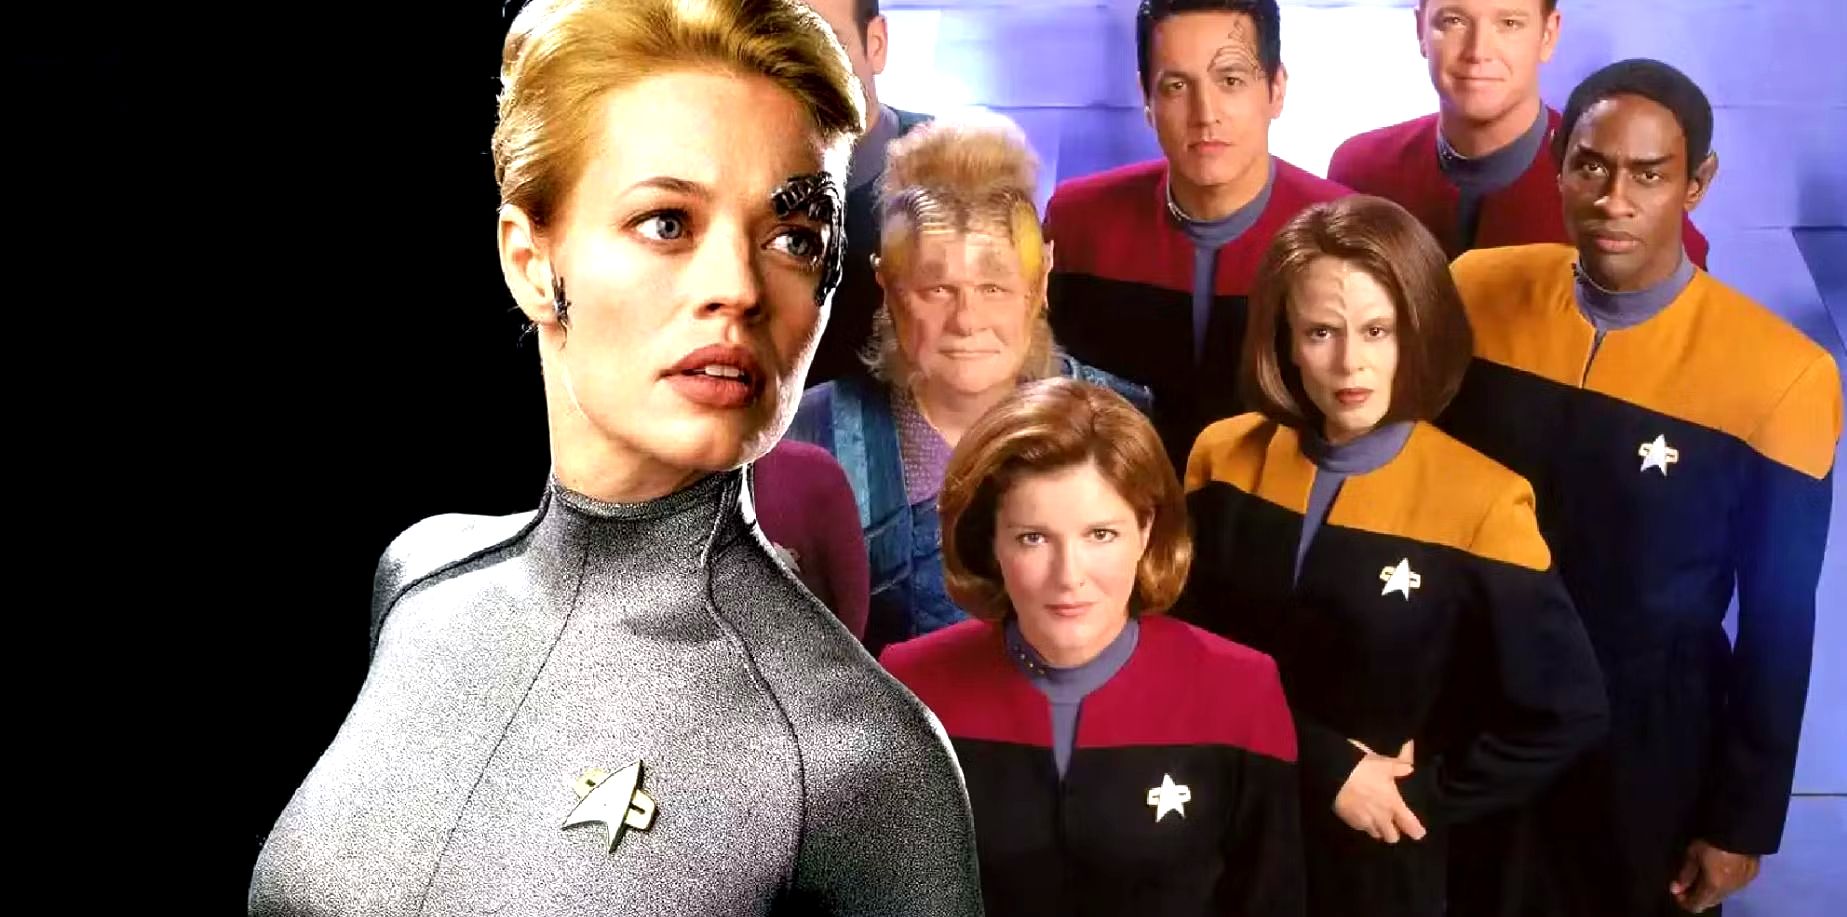 Seven Of Nine’s Addition To Star Trek: Voyager Created “A Difficult ...